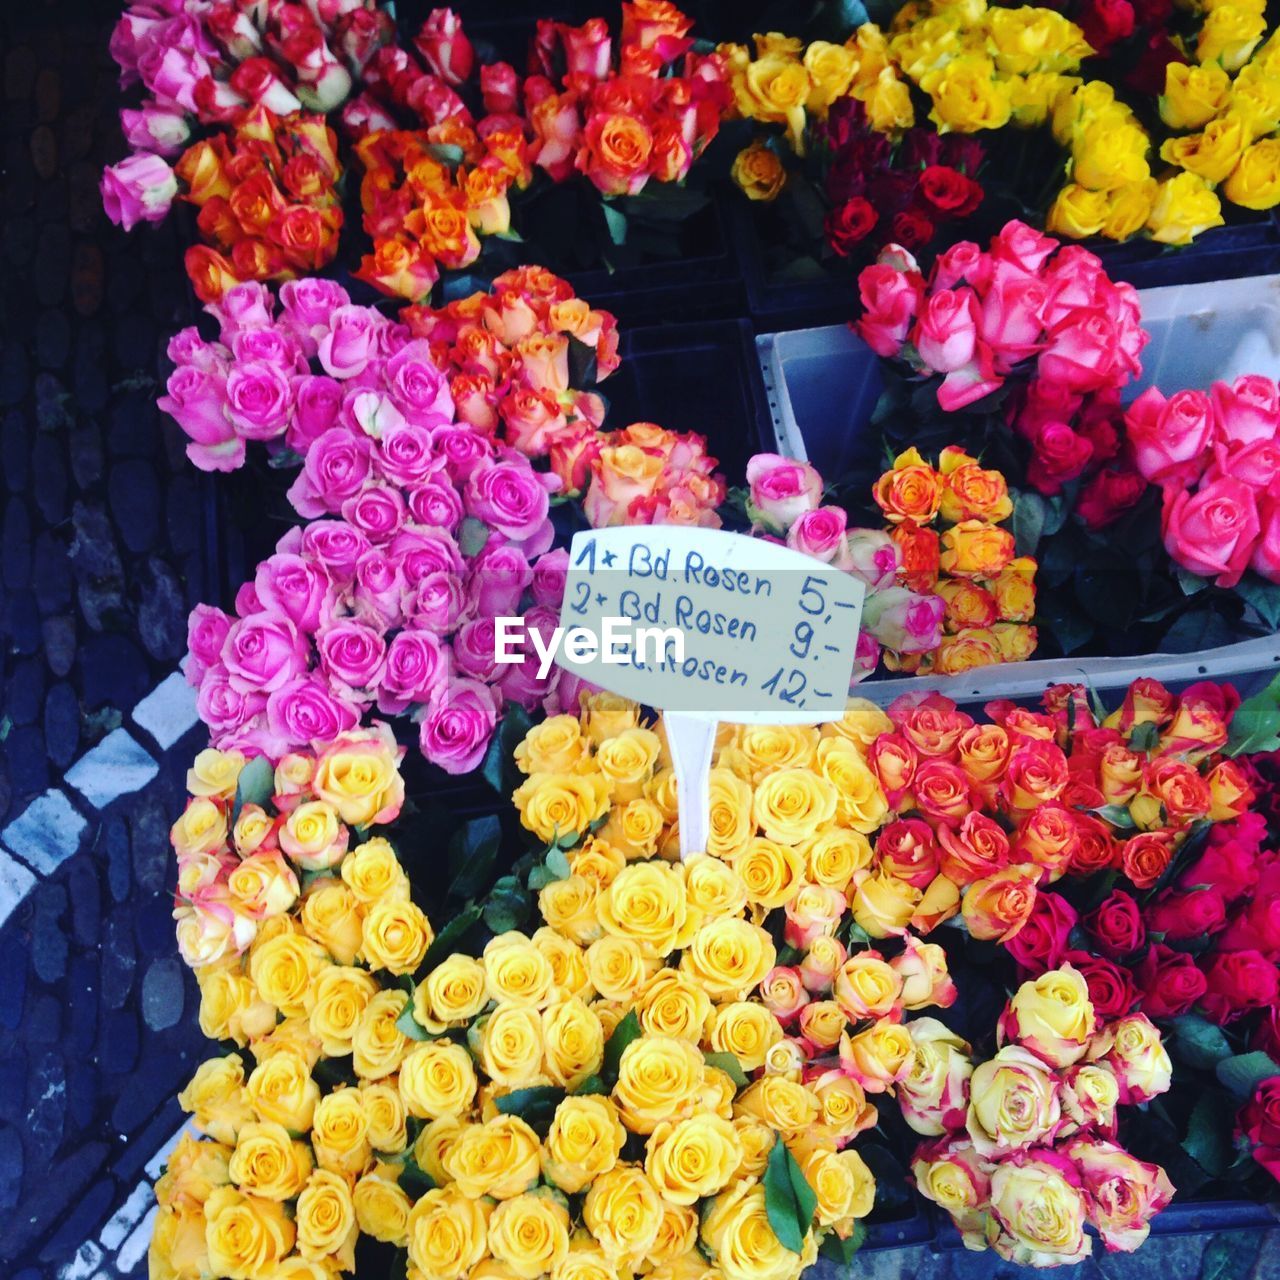 VARIOUS FLOWERS FOR SALE IN STORE